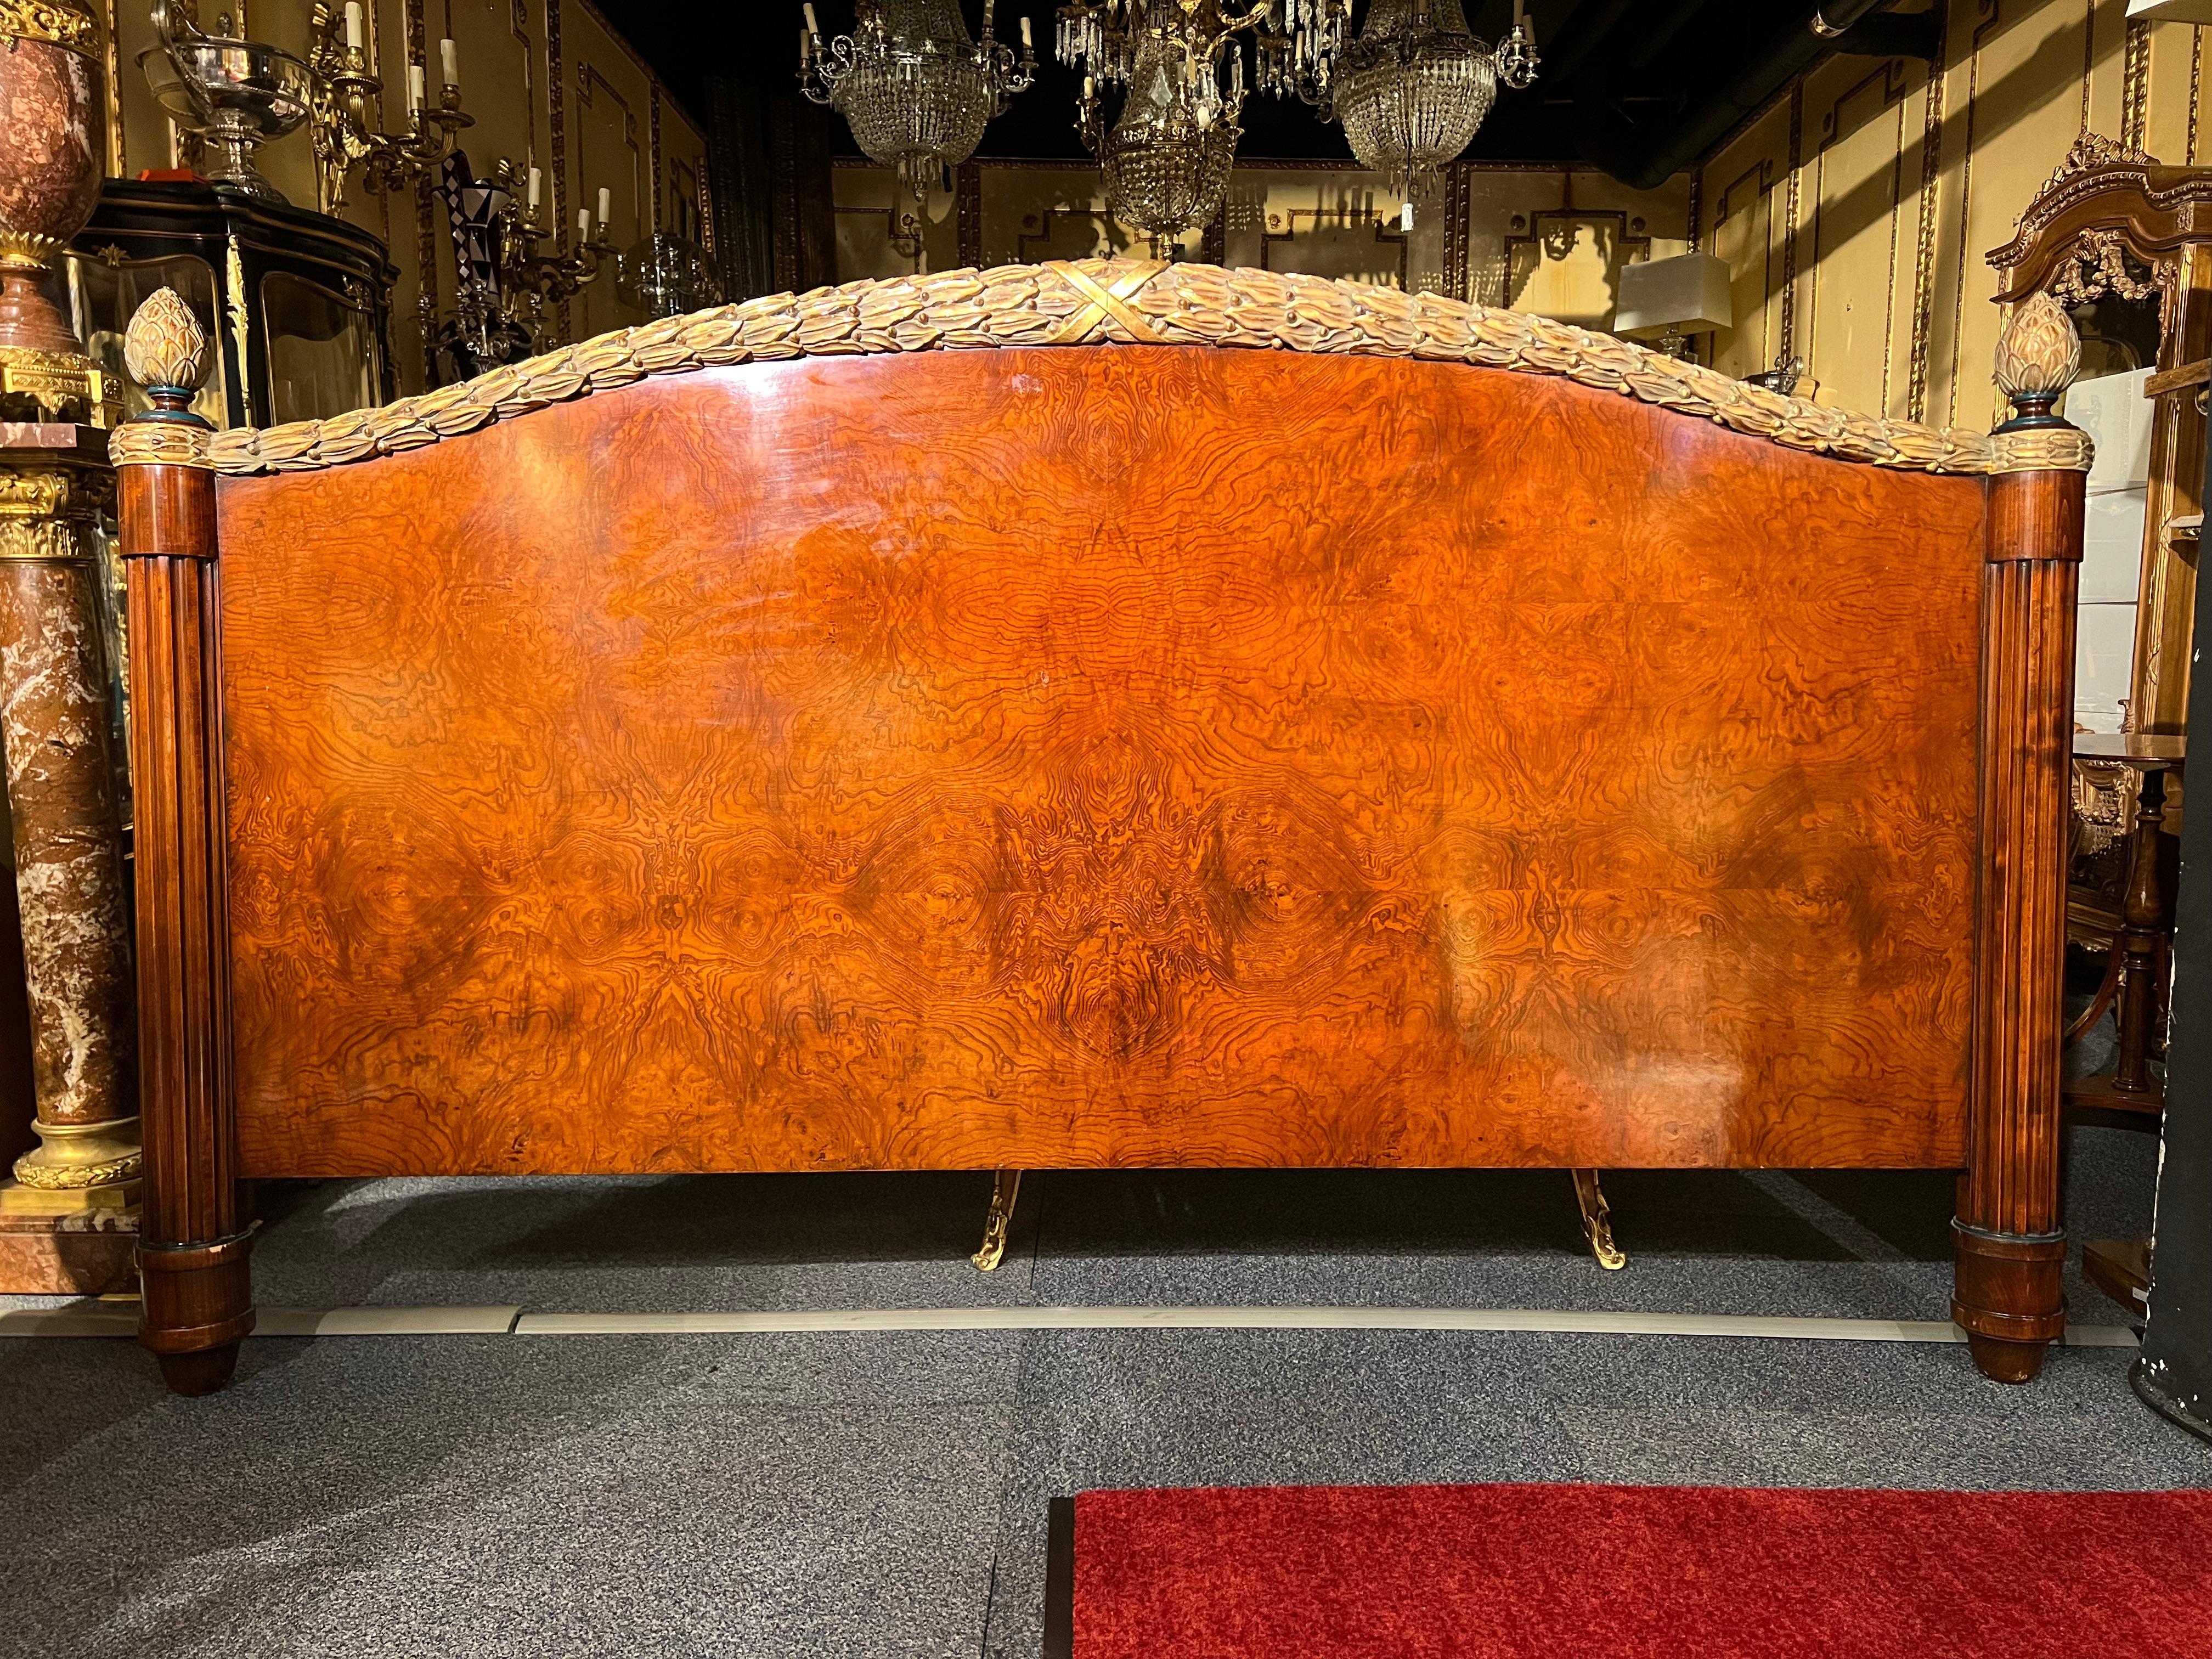 Bed headboard from a suite of the Viennese 5 star hotel in louis seize style.
Solid wood carved with root veneer.
Framed with beautiful laurel wreath carvings with Poliment gilding.